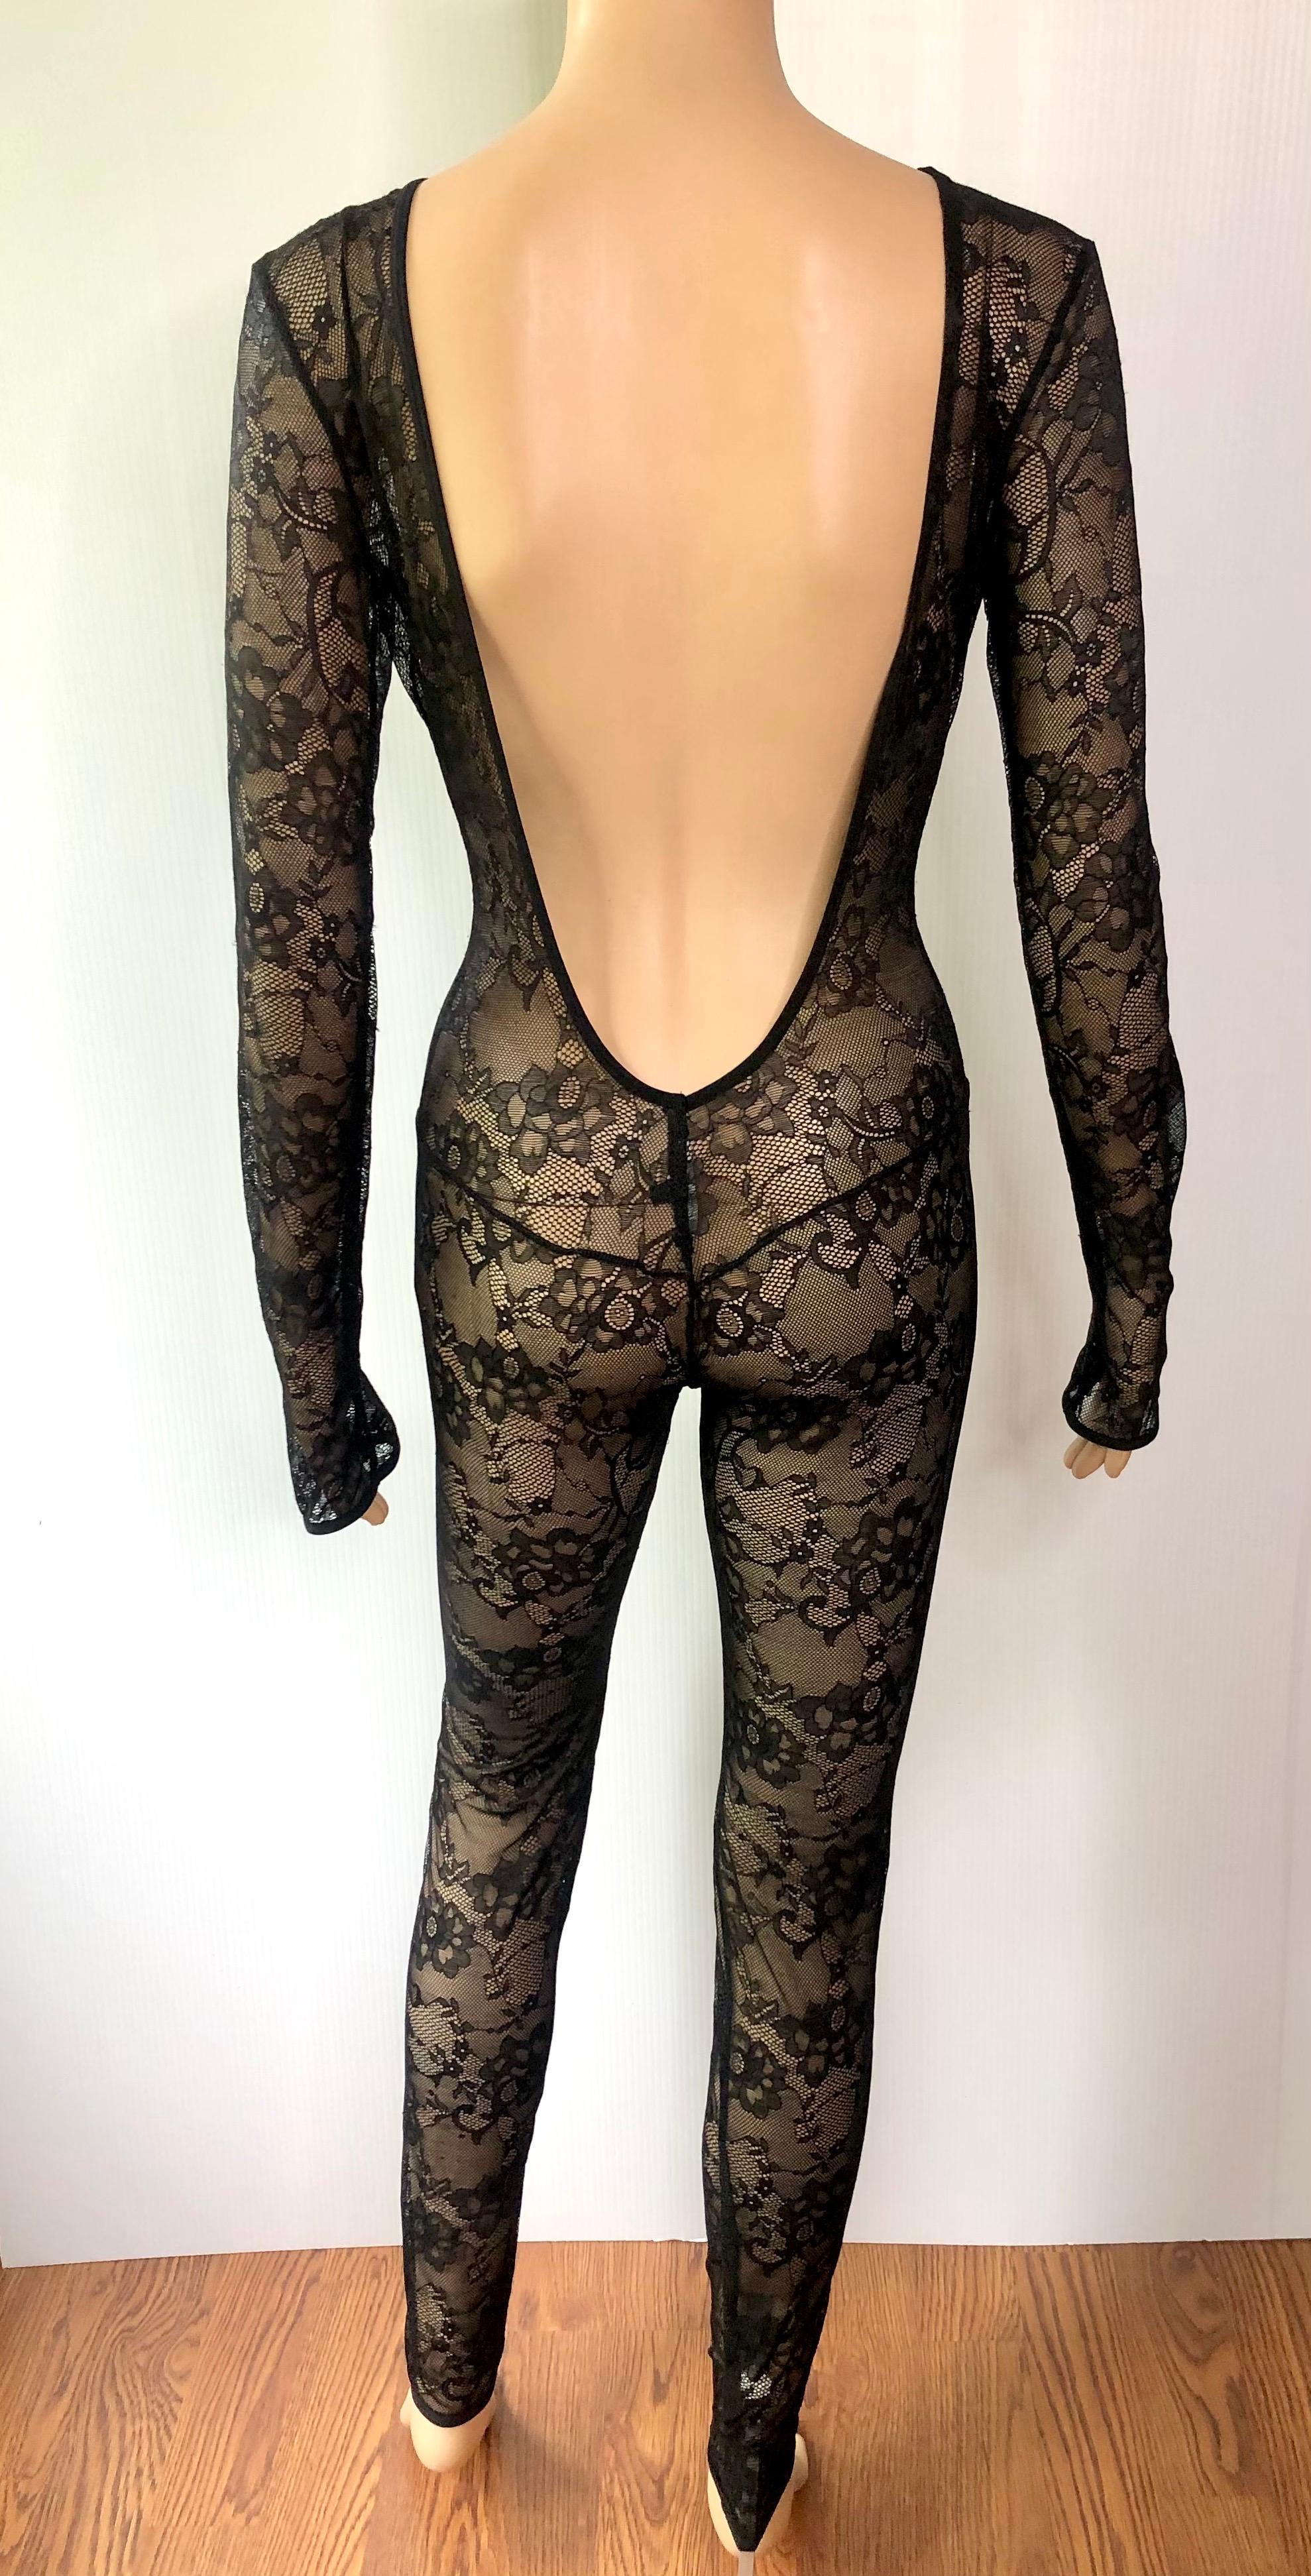 Gucci Plunging Neckline Open Back Sheer Lace Bodycon Black Playsuit Jumpsuit 1